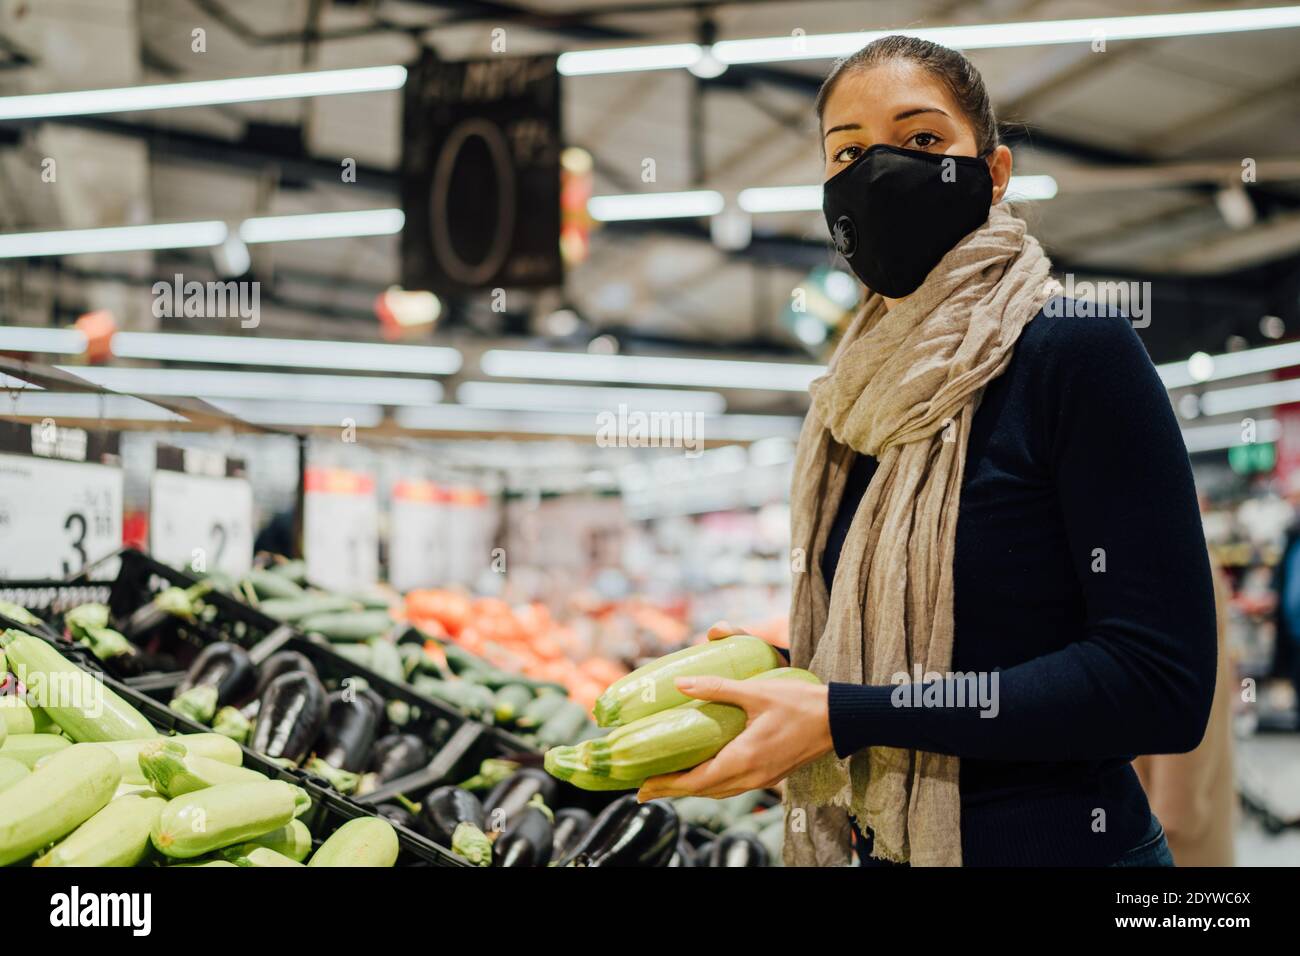 Young woman wearing protective face mask shopping in a supermarket,buying organic produce.Eating healthy food during coronavirus COVID - 19 pandemic.H Stock Photo